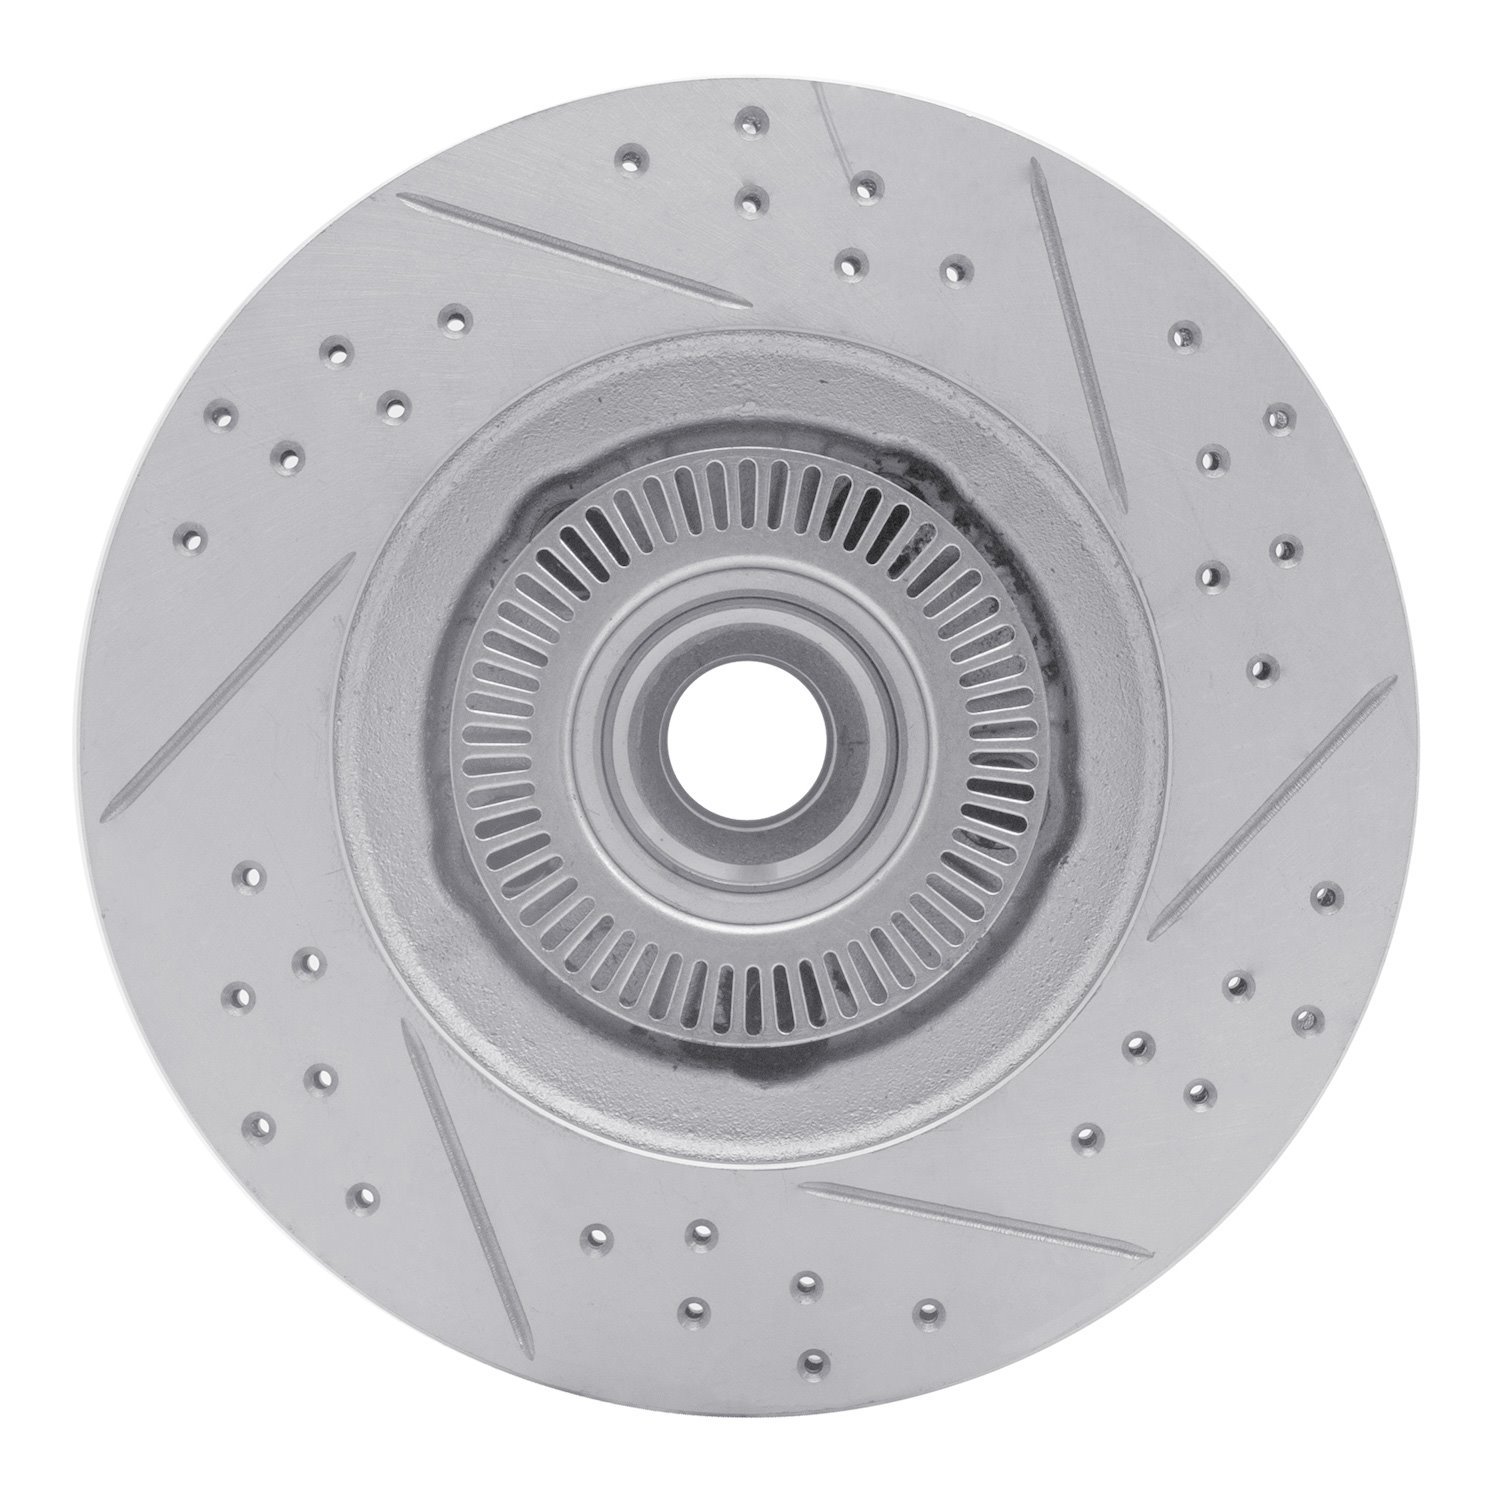 830-54141L Geoperformance Drilled/Slotted Brake Rotor, 1995-2011 Ford/Lincoln/Mercury/Mazda, Position: Front Left